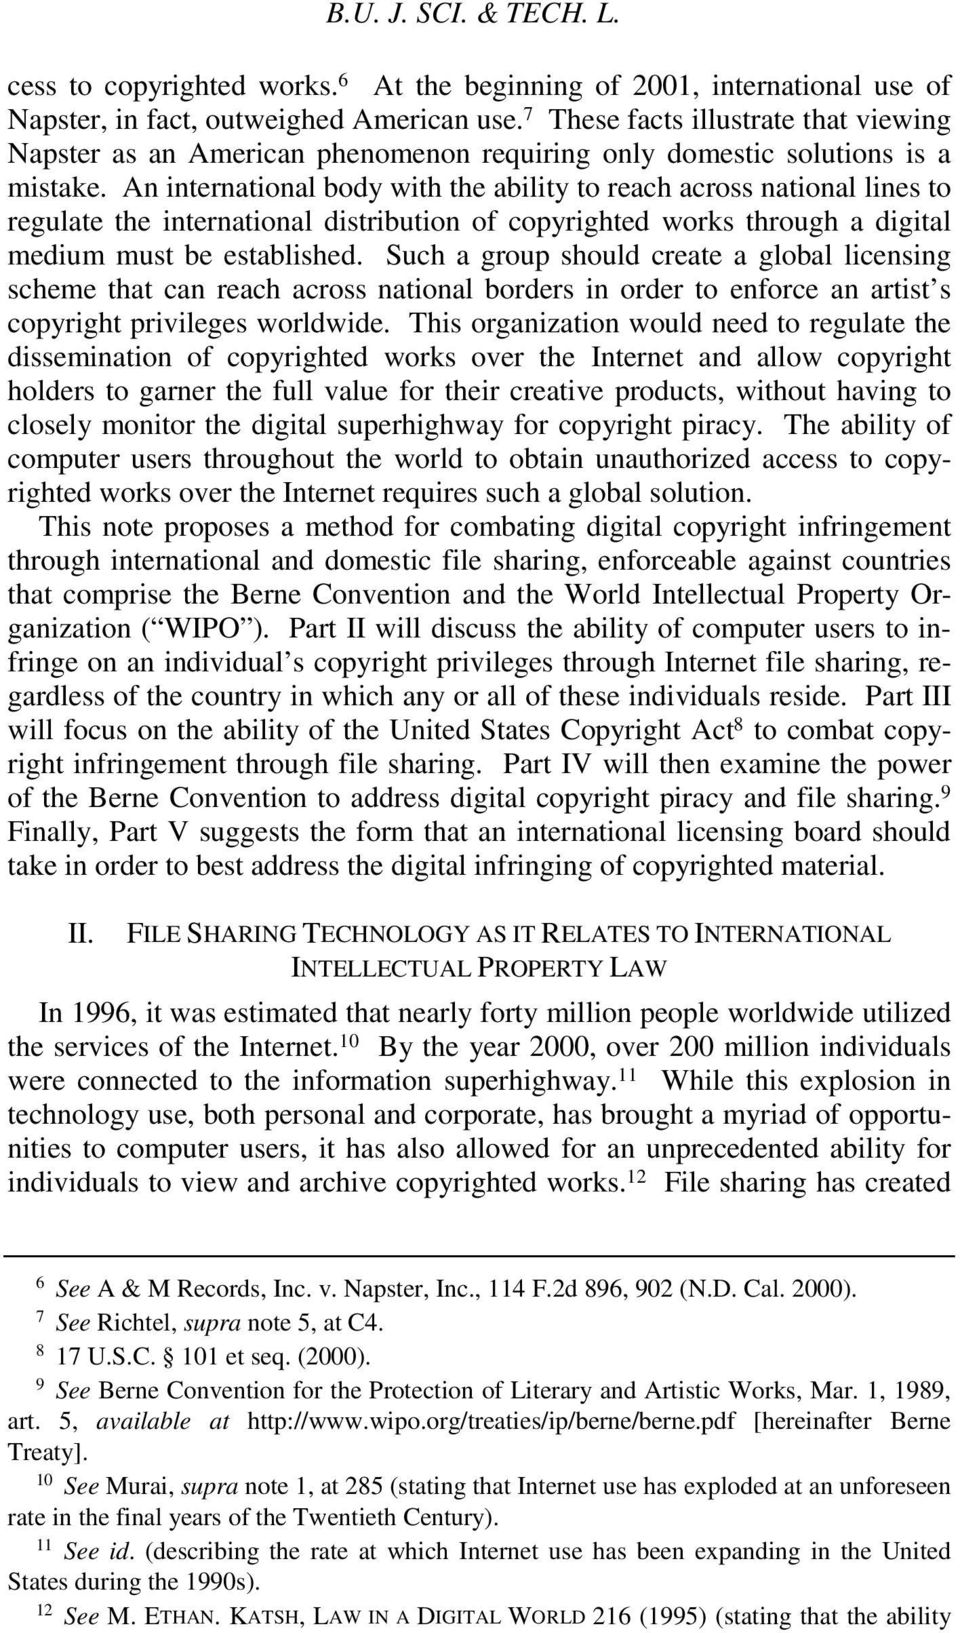 An international body with the ability to reach across national lines to regulate the international distribution of copyrighted works through a digital medium must be established.